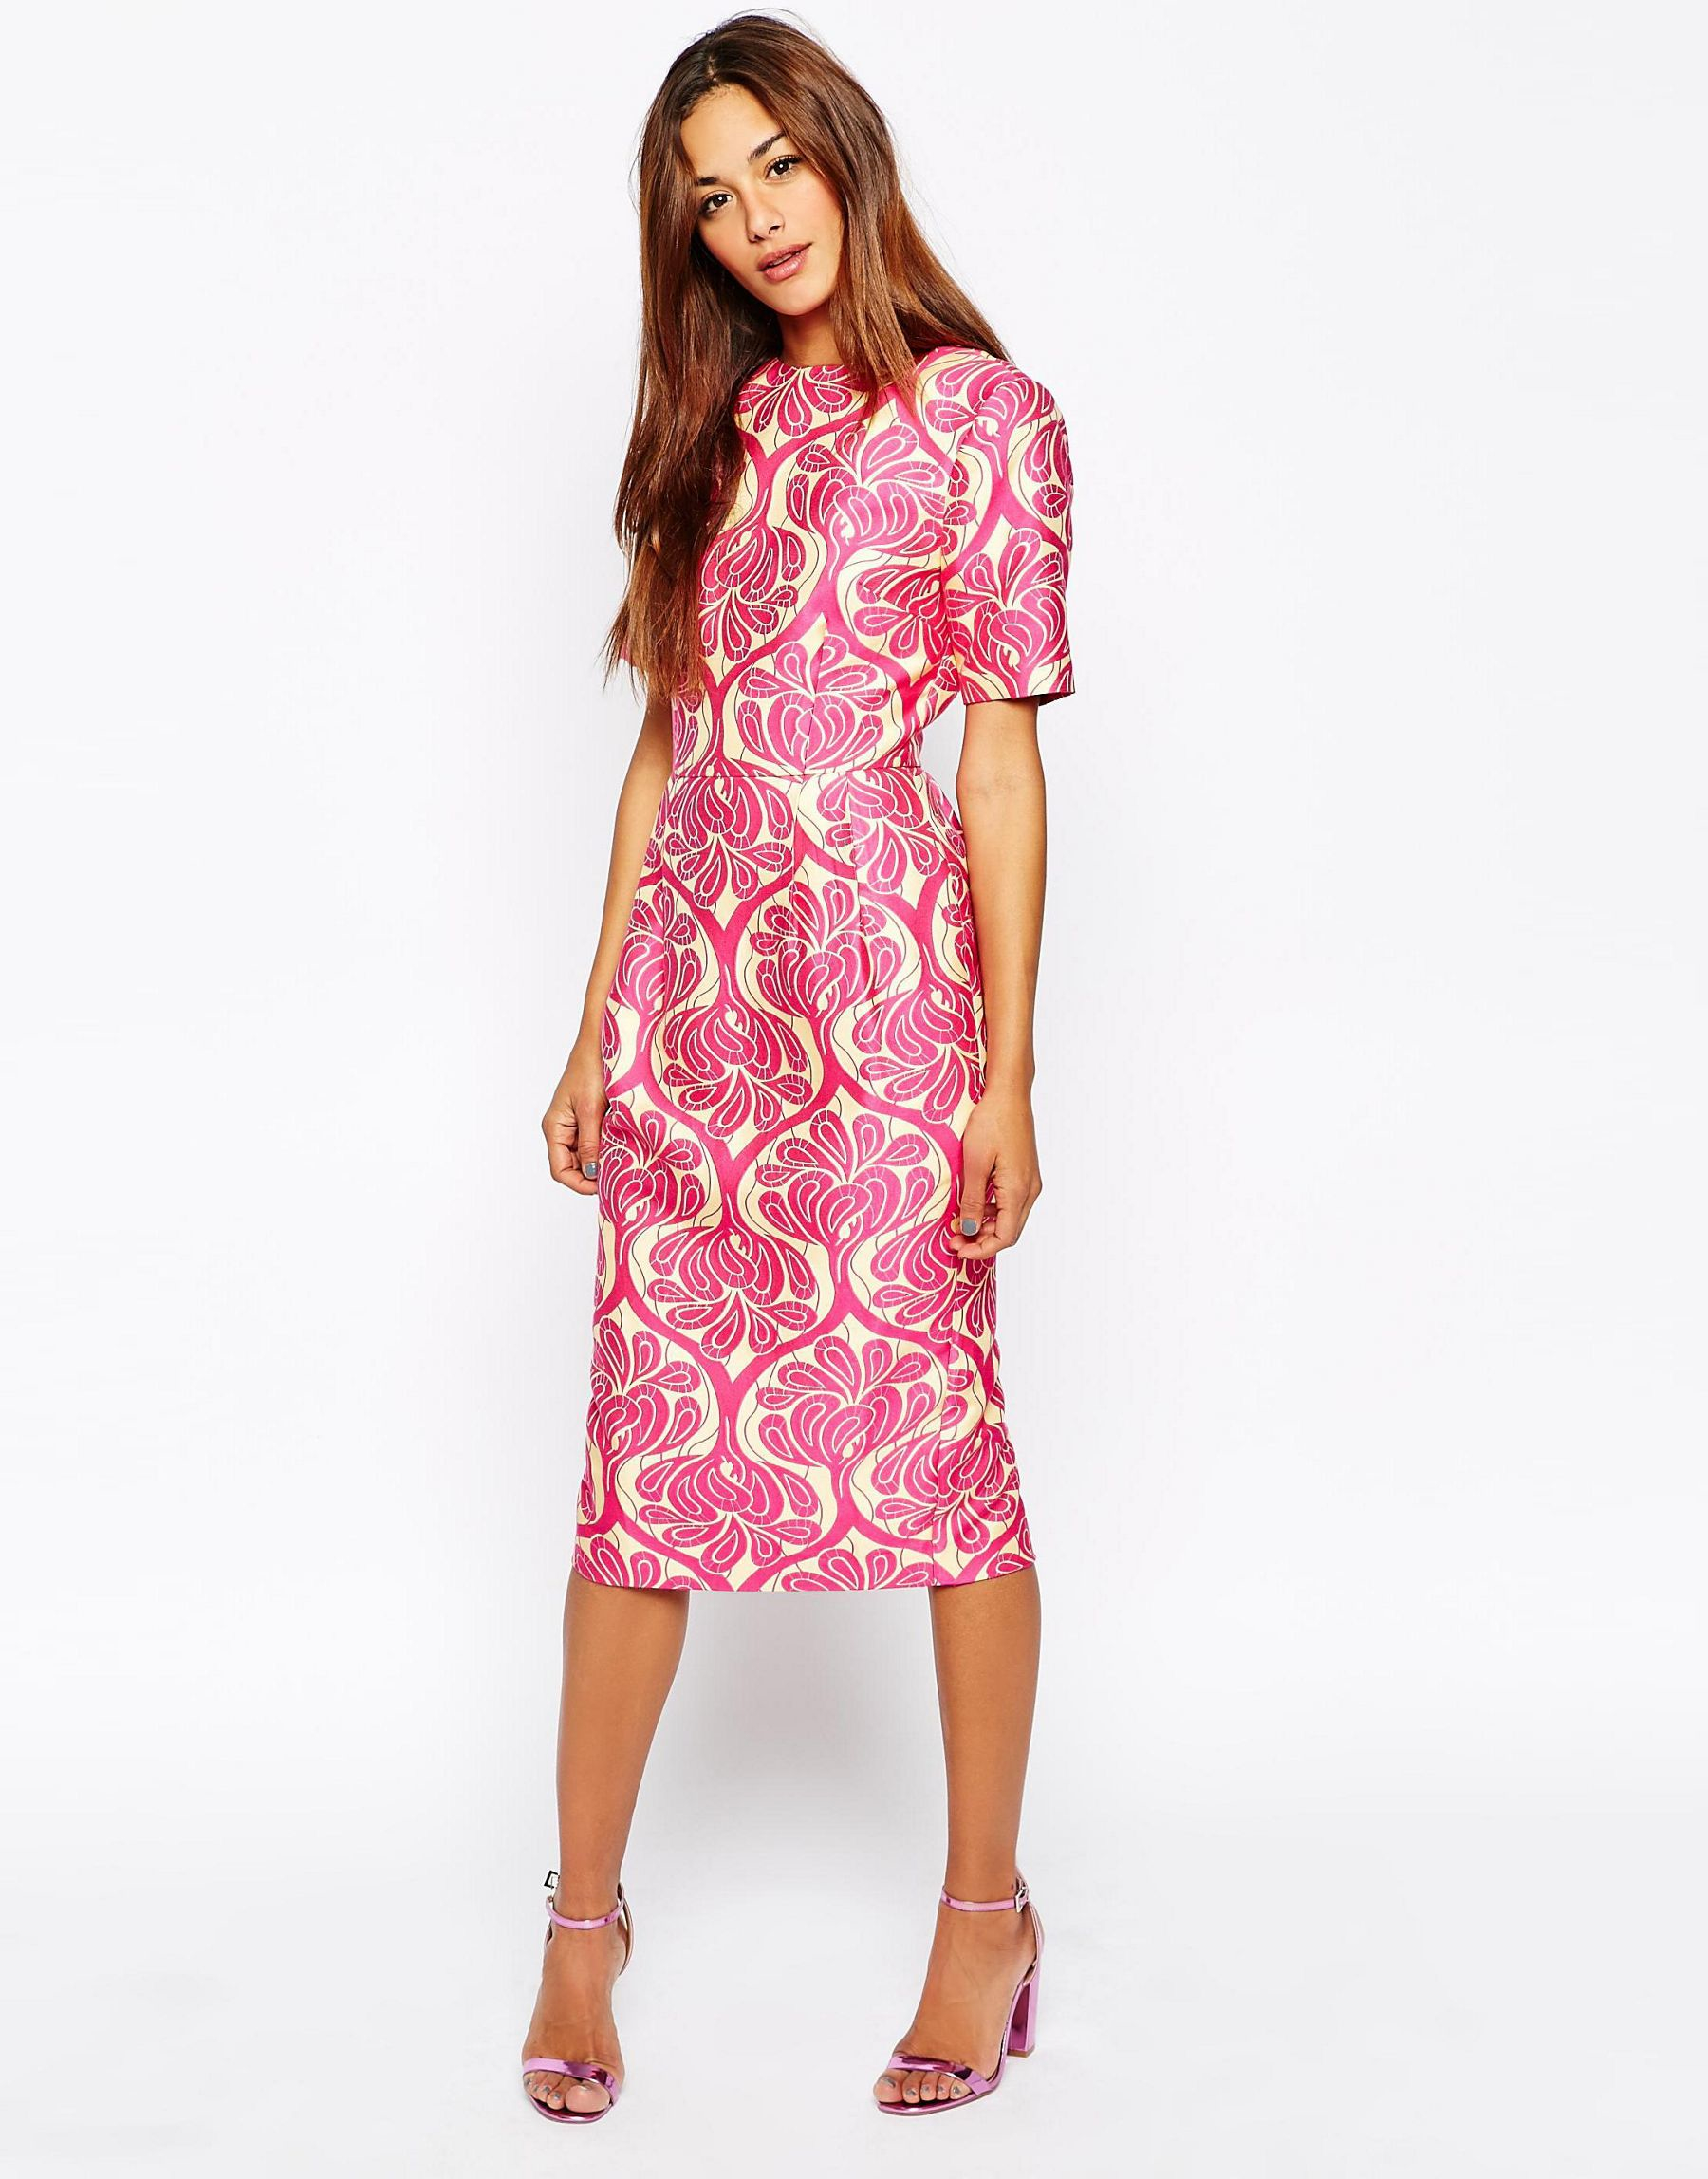  ASOS  Synthetic Jacquard Wiggle Dress in Print Pink Lyst